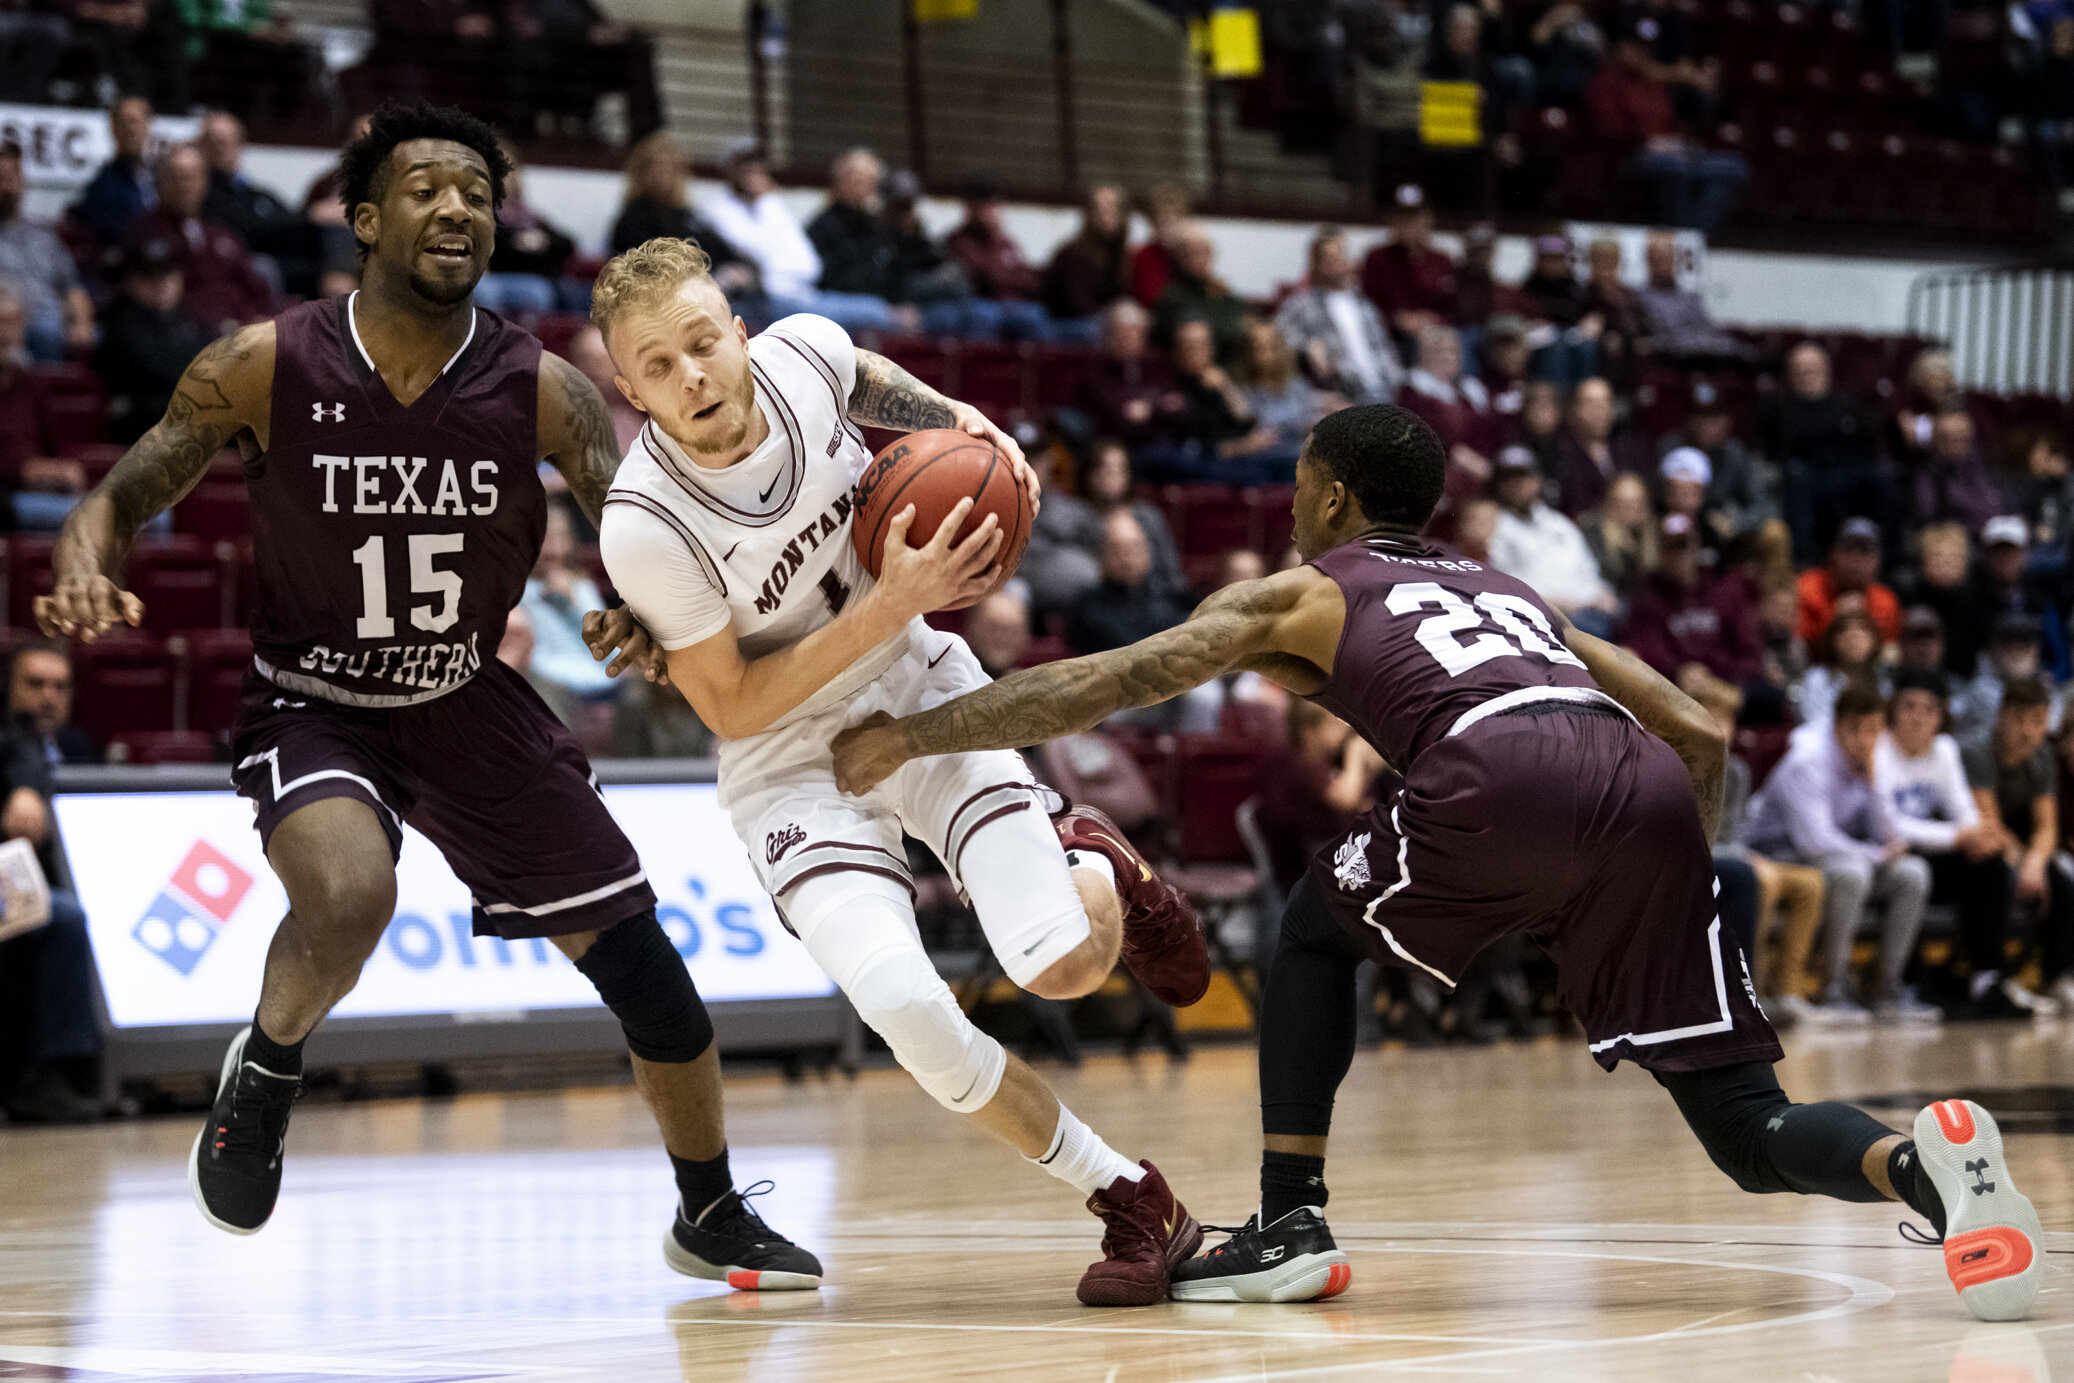  Montana's Timmy Falls, middle, drives the ball between Texas Southern's Justin Hopkins, left, and Tyrik Armstrong, right during their game at Dahlberg Arena, Nov. 25, 2019 in Missoula, Mont. 